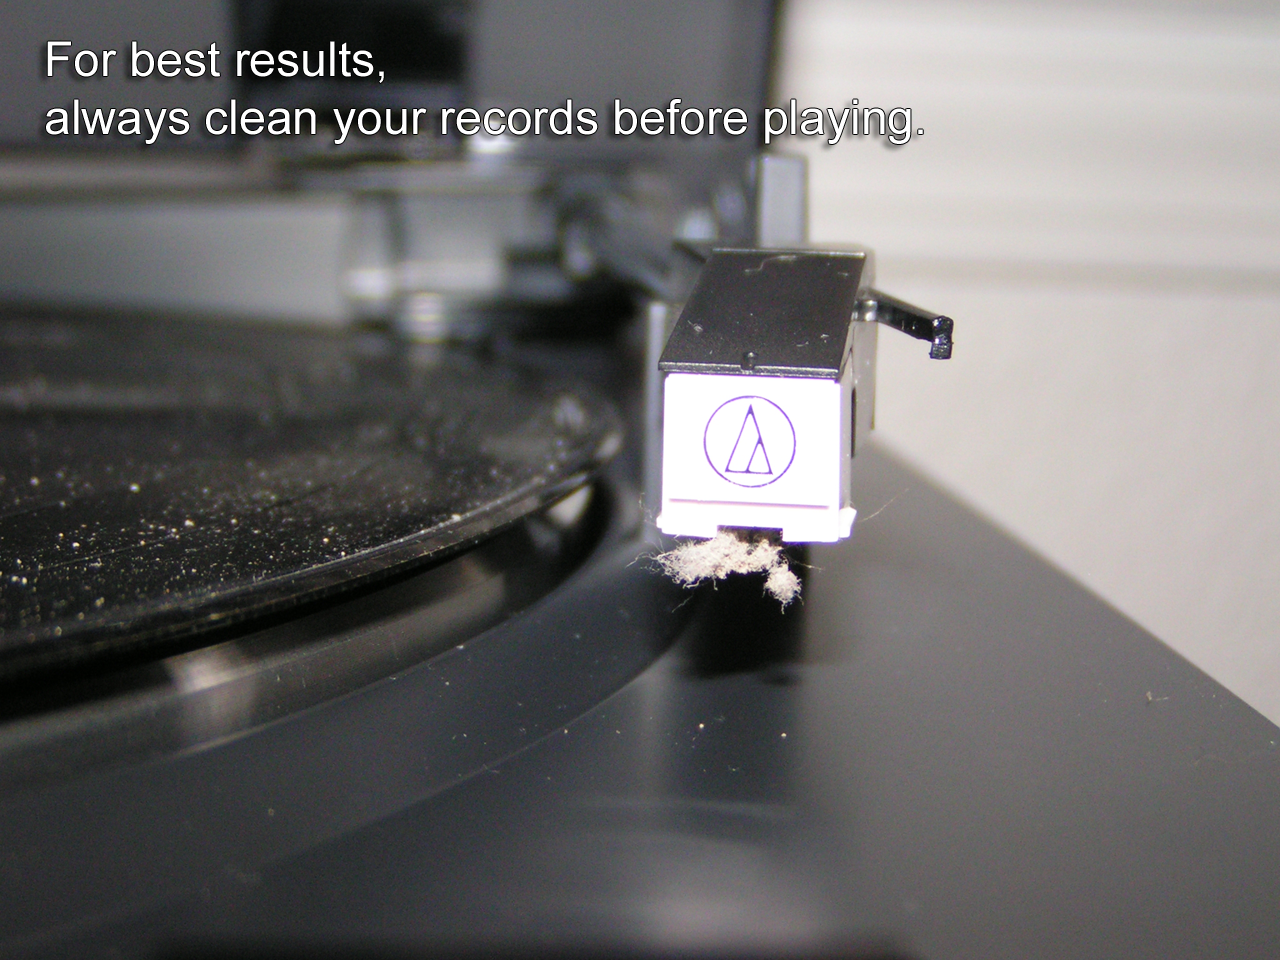 Outrageously dustry record player needle with dirty record in background. Caption reads, 'For best results, always clean your records before playing.'